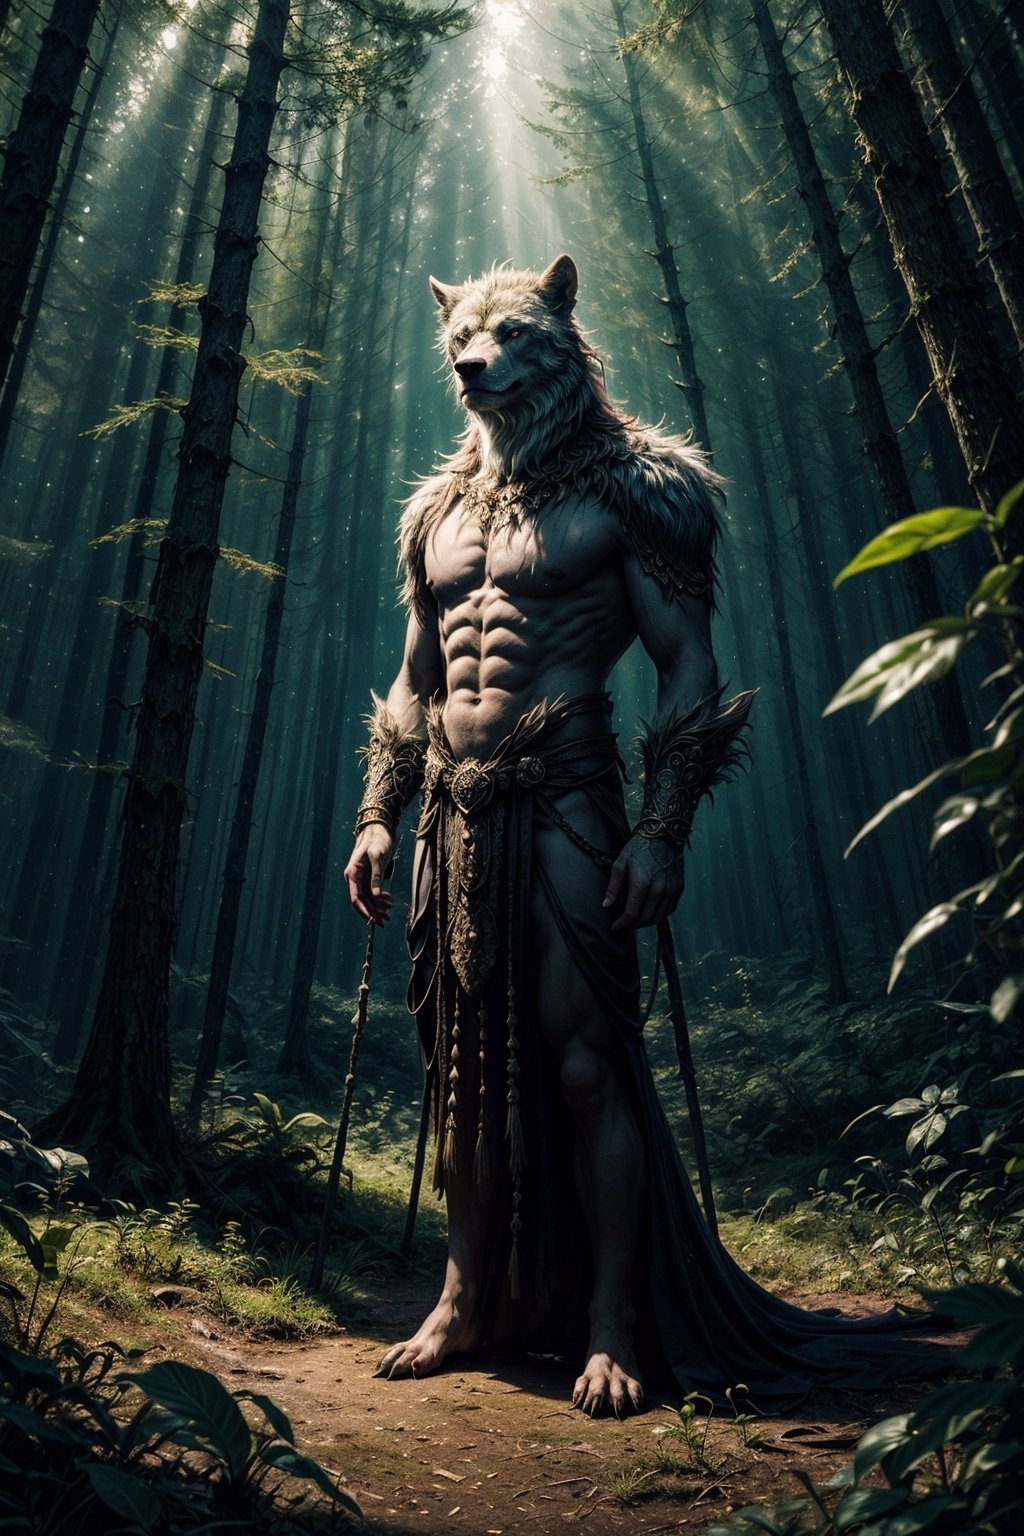 A fantastical full-body portrait of a mythical creature, half-human and half-beast, standing tall in a mythical forest. The art form is digital illustration, taking inspiration from the works of Brian Froud. The scene is filled with magical elements, like floating orbs and glowing flora. The color temperature is a mix of warm and cool hues, enhancing the sense of wonder. The facial expression reflects the creature’s mystical nature, with a hint of mystery. The lighting creates a magical ambiance, casting intricate patterns of light and shadow on the forest floor. The atmosphere is enchanting and filled with ancient secrets.